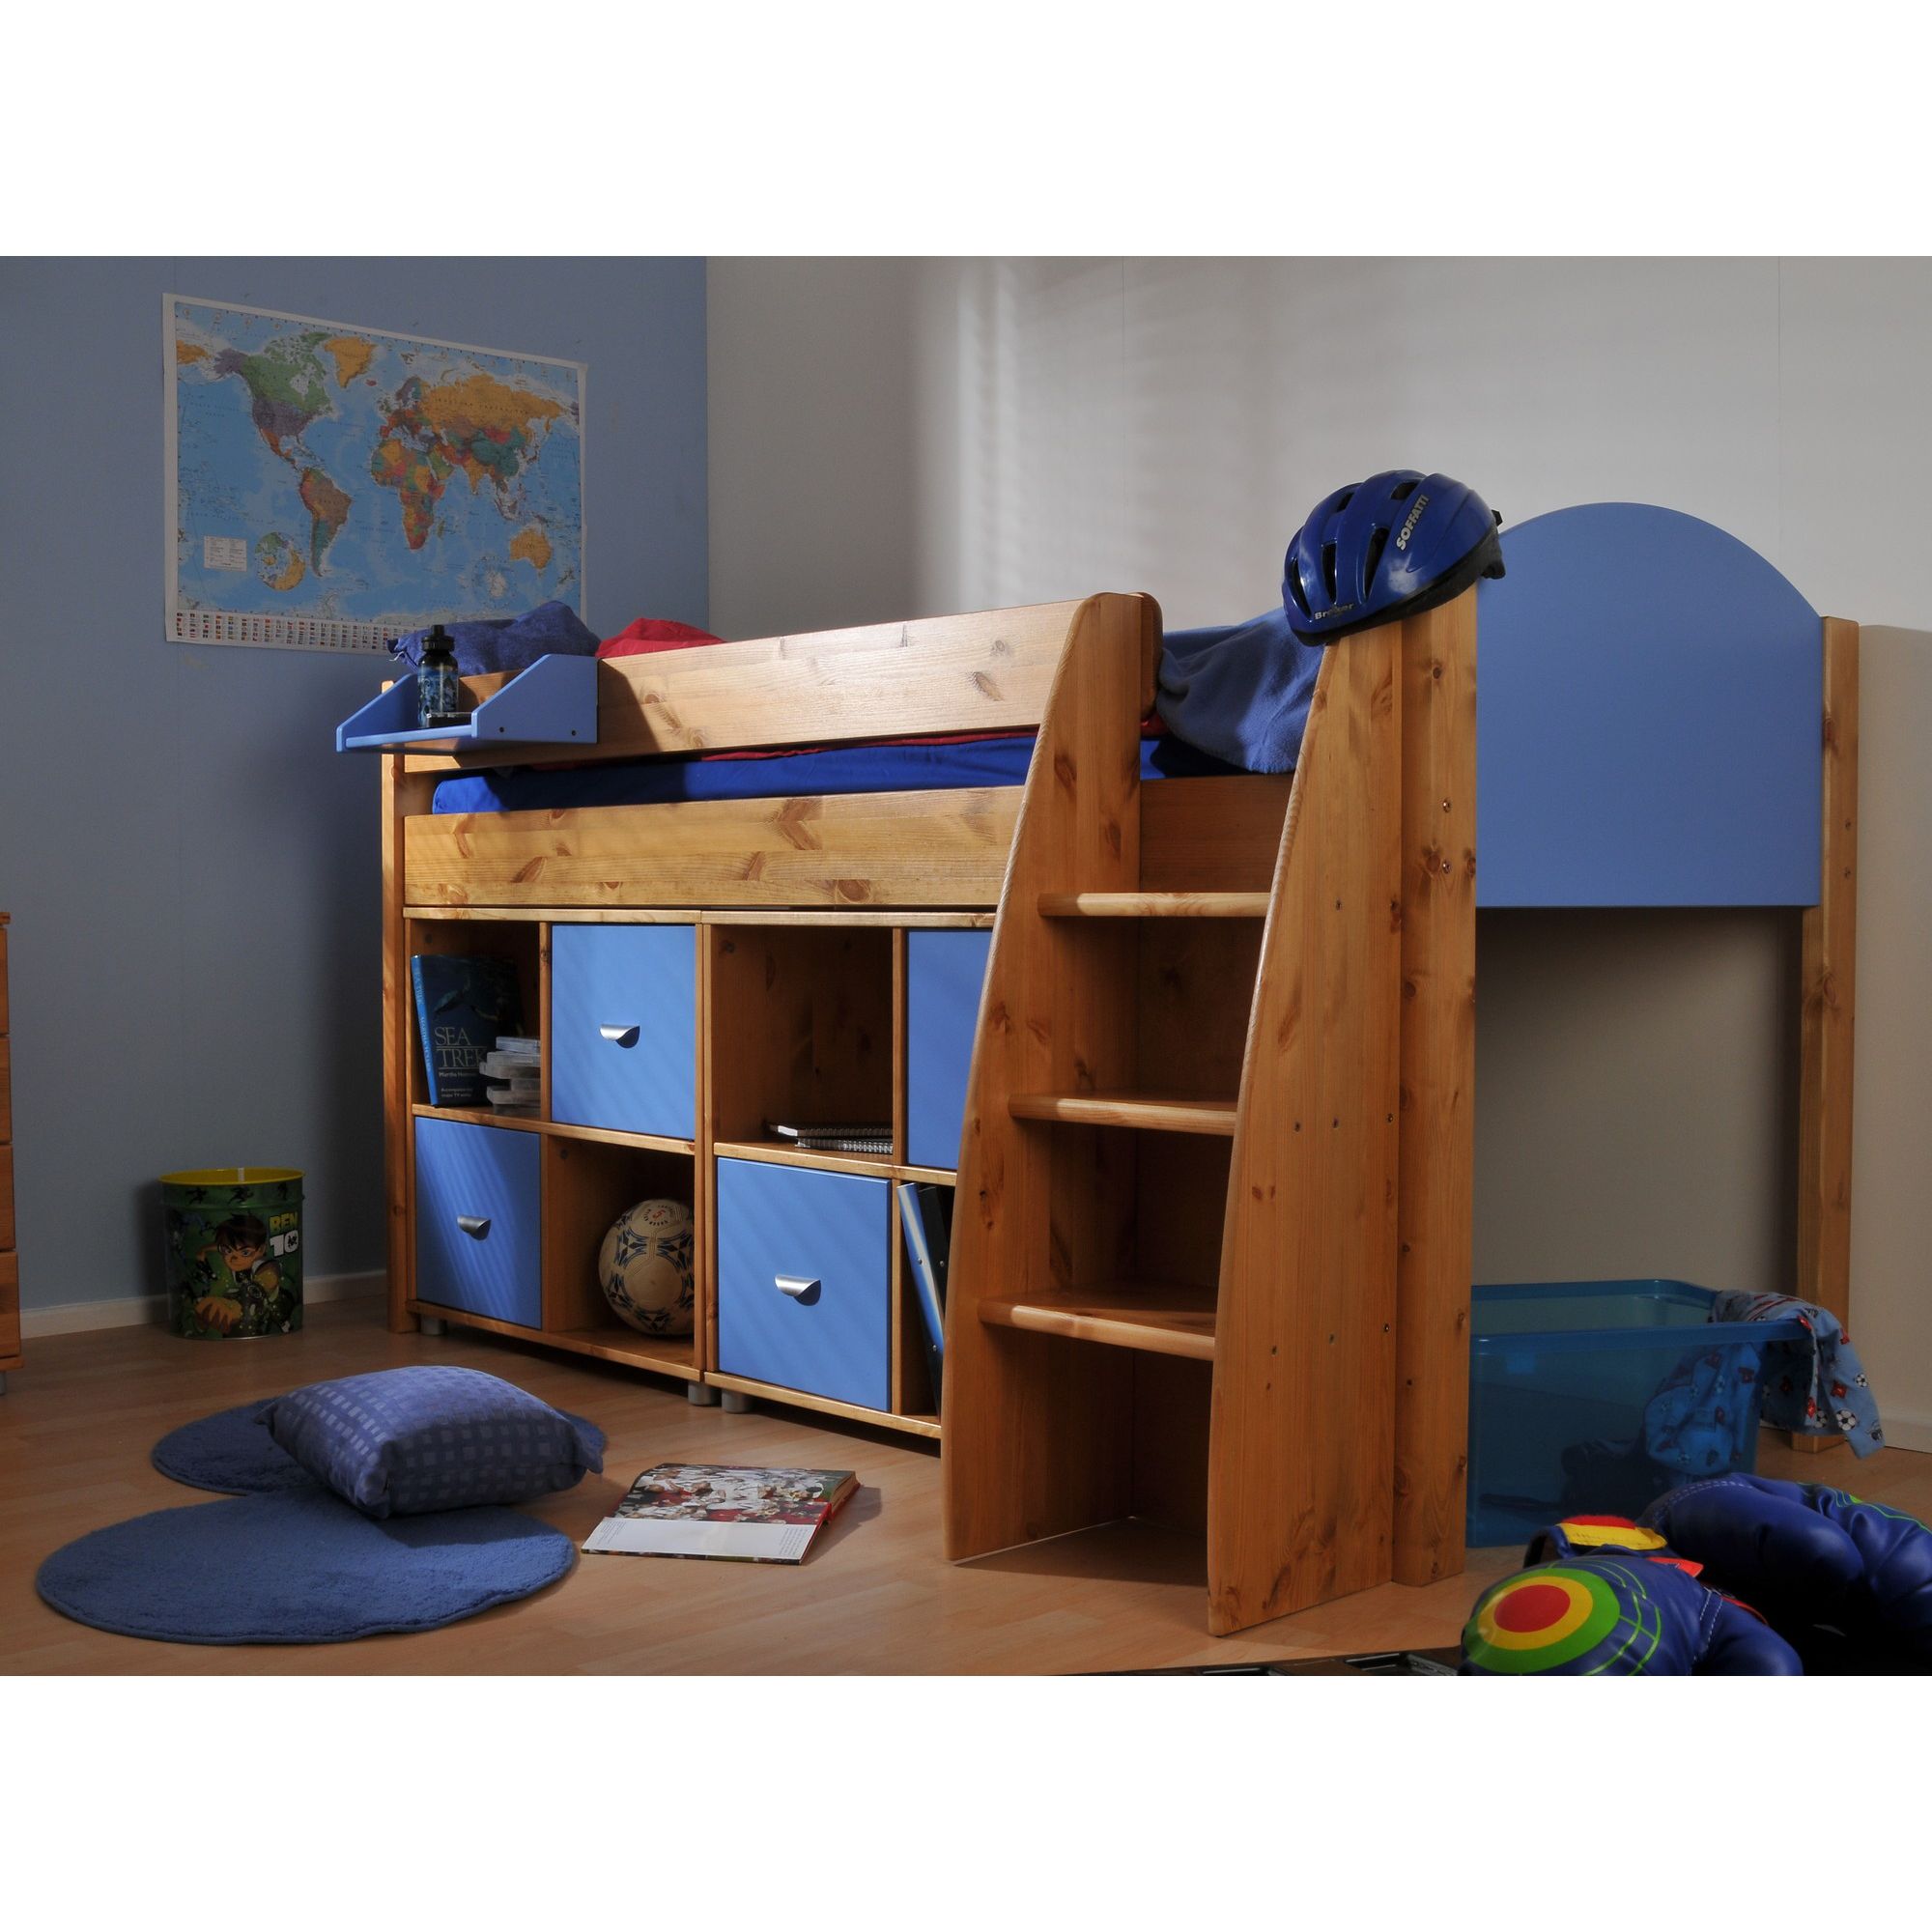 Stompa Rondo Mid Sleeper with 8 Cube Unit - Antique - Blue at Tesco Direct